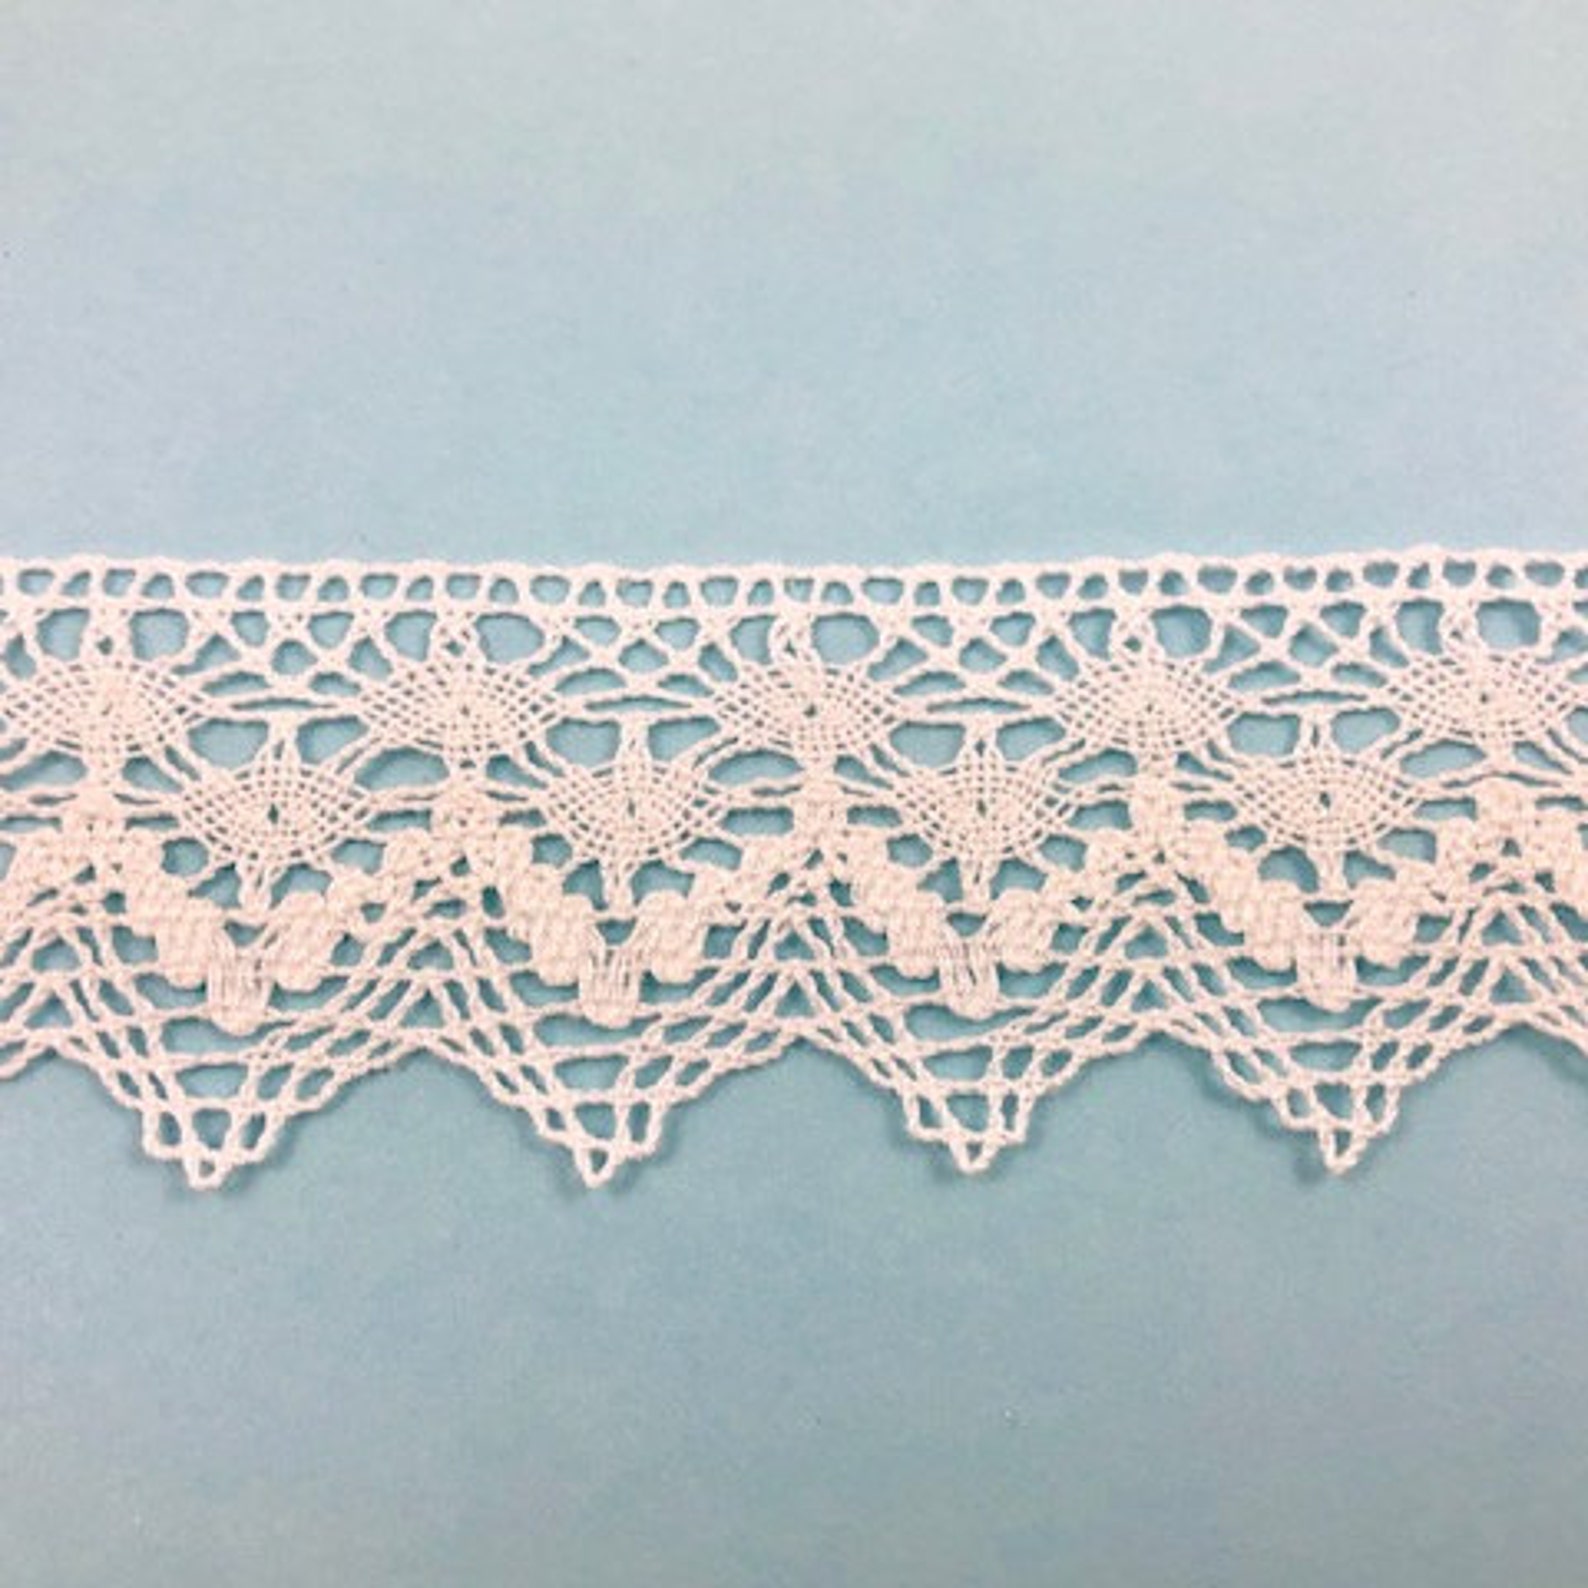 Beautiful Spanish Lace. 100% Cotton Lace Edging for Heirloom - Etsy